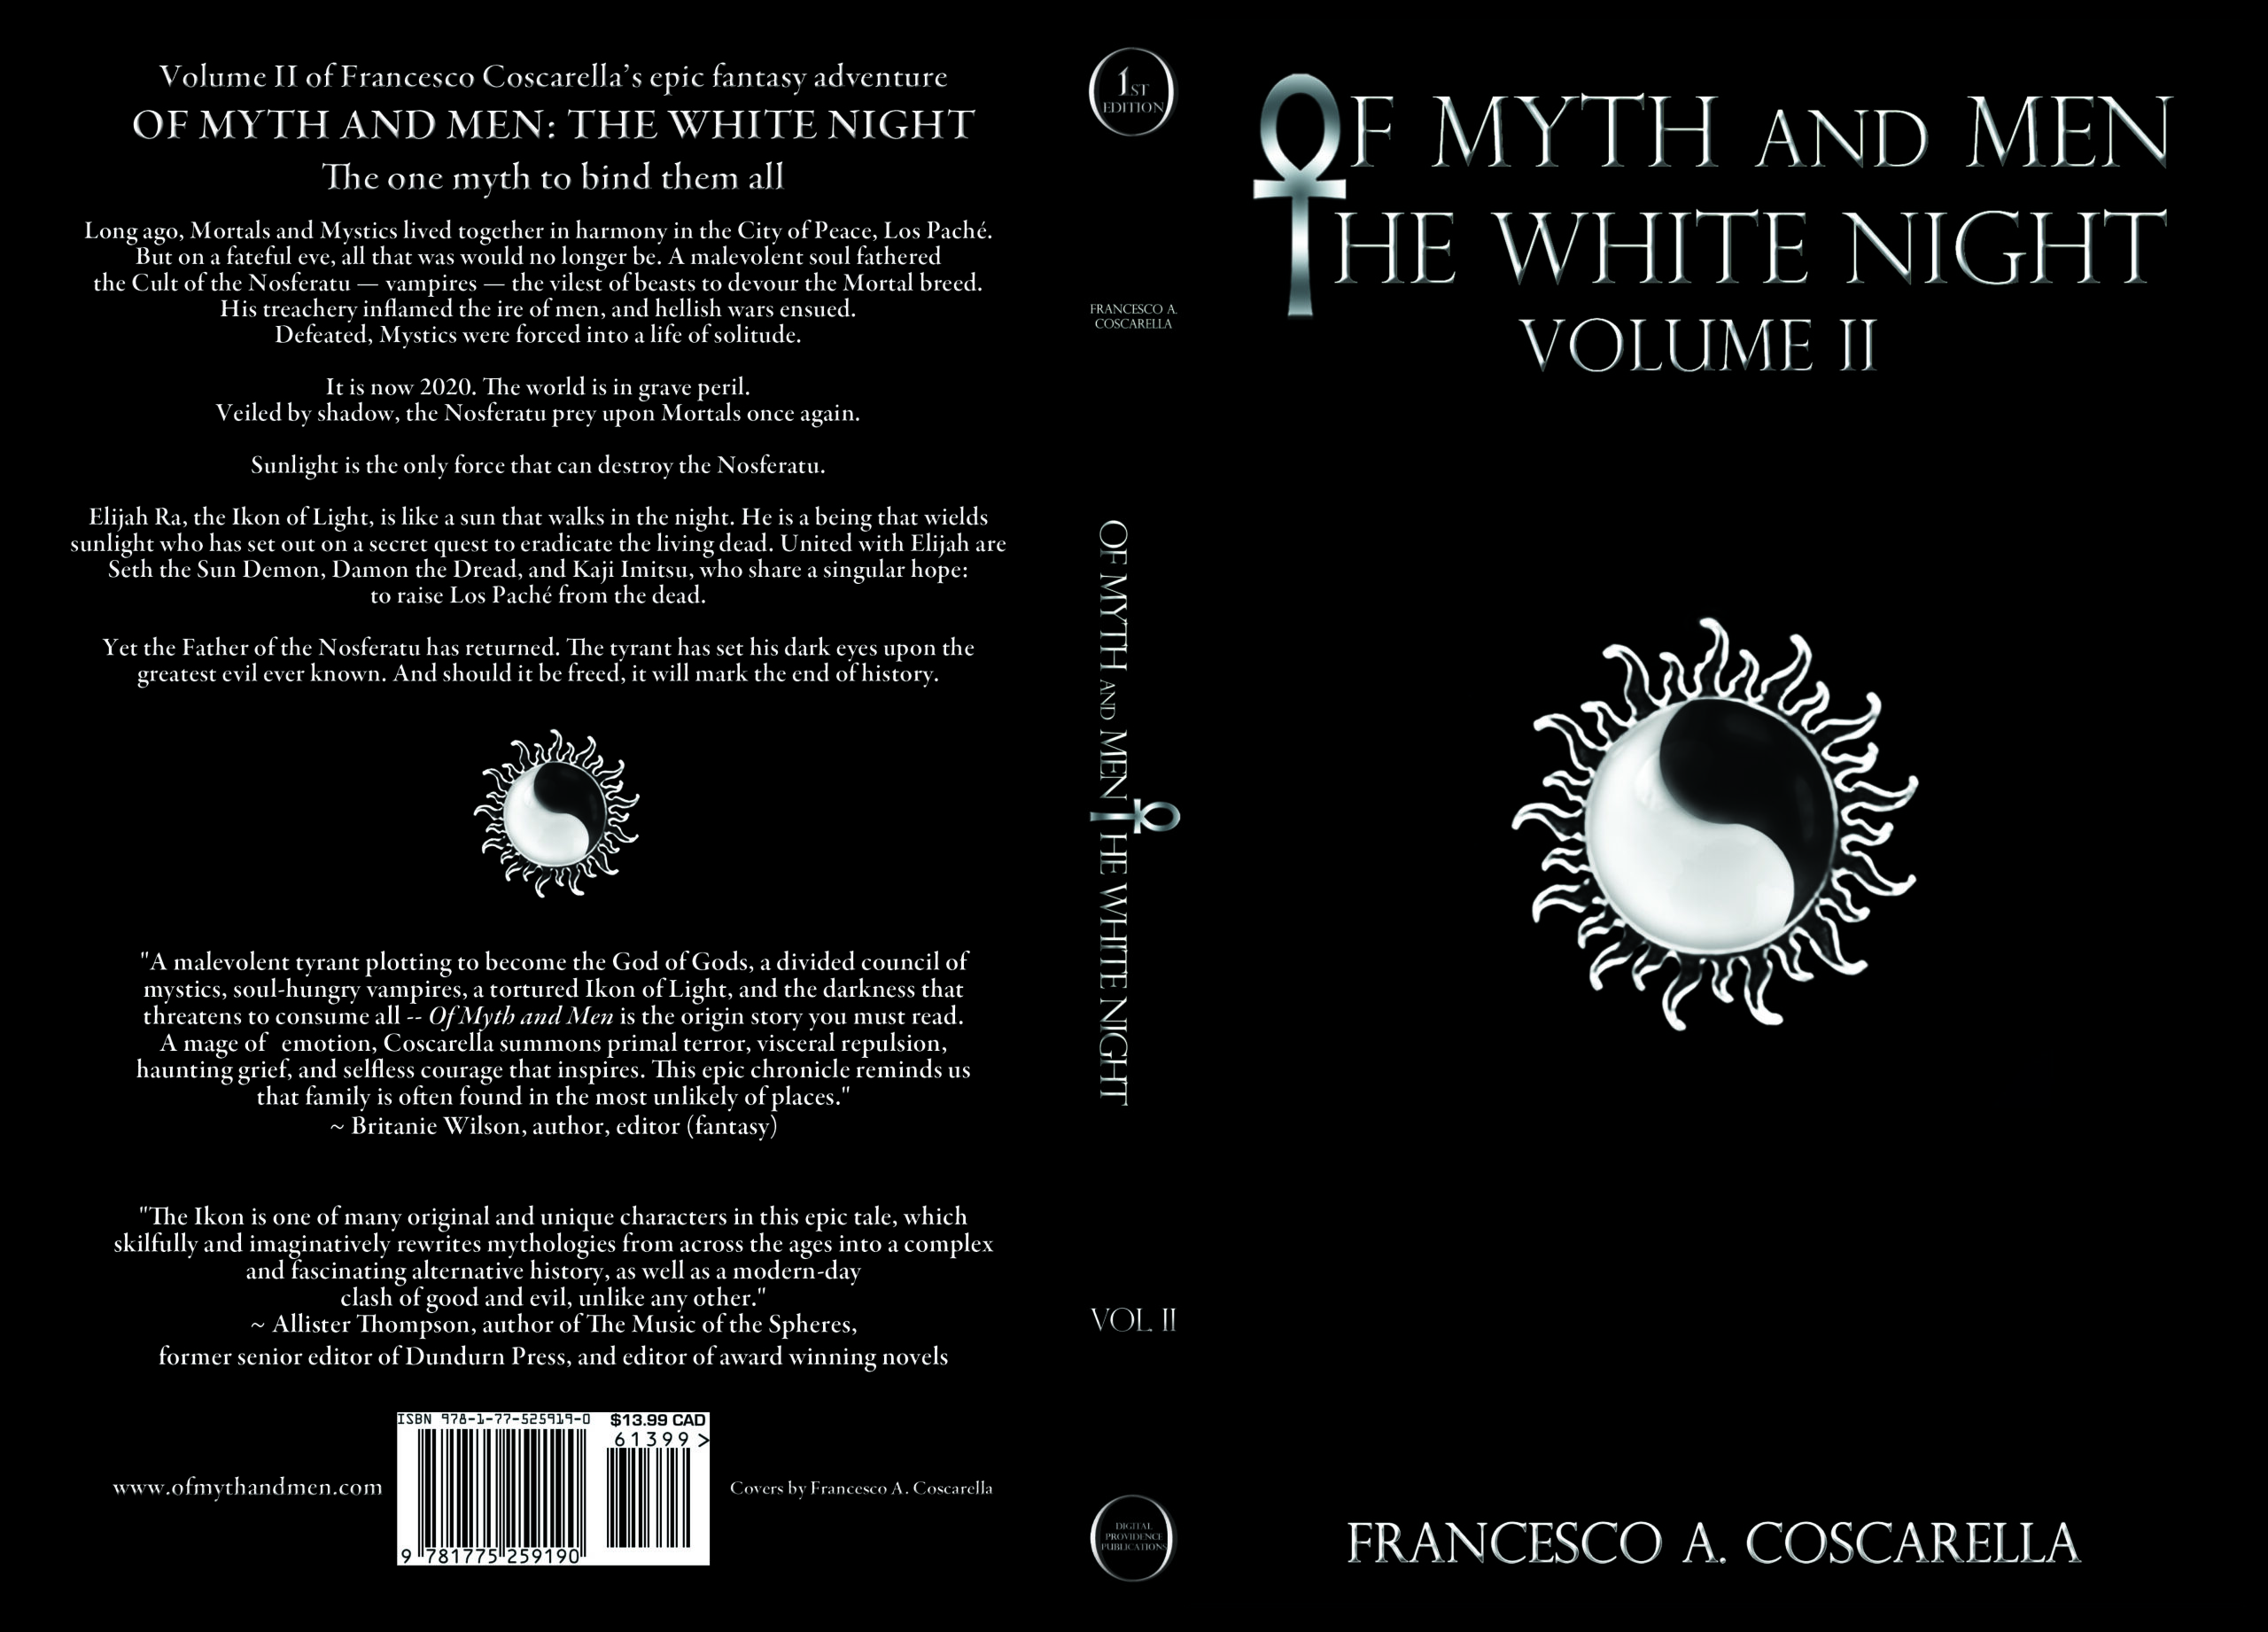 Standard Cover for Of Myth and Men The White Night Vol. II – the modern day epic fantasy (available in select bookstores) is a must read fantasy novel that explores dark fantasy, urban fantasy, vampire fiction fantasy, mythology, action, adventure, heroism, magic, sword and sorcery, as well as the struggle between good and evil all within an alternative history unlike any other. The relatable yet complex and flawed characters embark upon a secret and dangerous quest to eradicate the living dead – vampires – to restore peace between Mortals and all mythological creatures. The young adult fiction origin story is rich in descriptive detail that includes immersive intricate worldbuilding along with exploring themes of power, politics, and betrayal, as well as friendship, loyalty and coming of age. Readers agree – this new fiction is at minimum a cool fantasy book, if not one of the best fantasy reads and top fantasy novels available today. Of Myth and Men The White Night is an epic story that is set to be a great fantasy series that must be a movie.